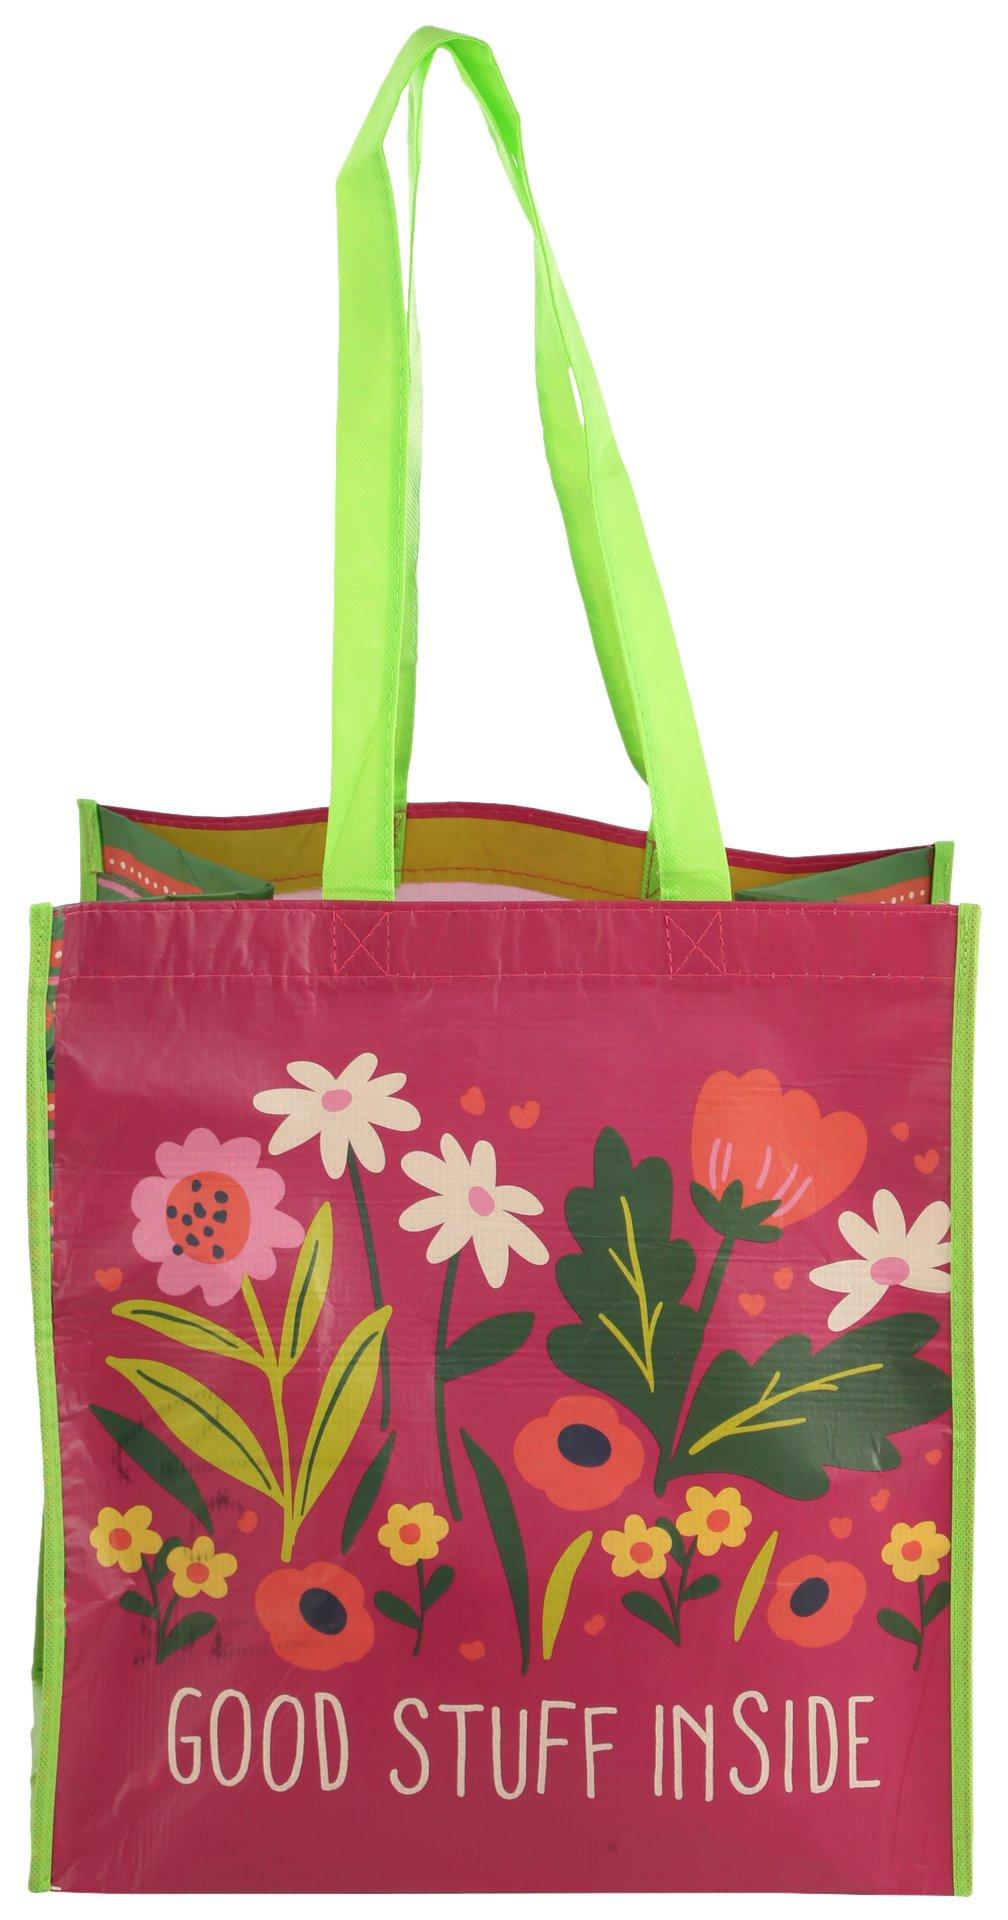 Karma Good Stuff Inside Floral Recycled Reusable Tote